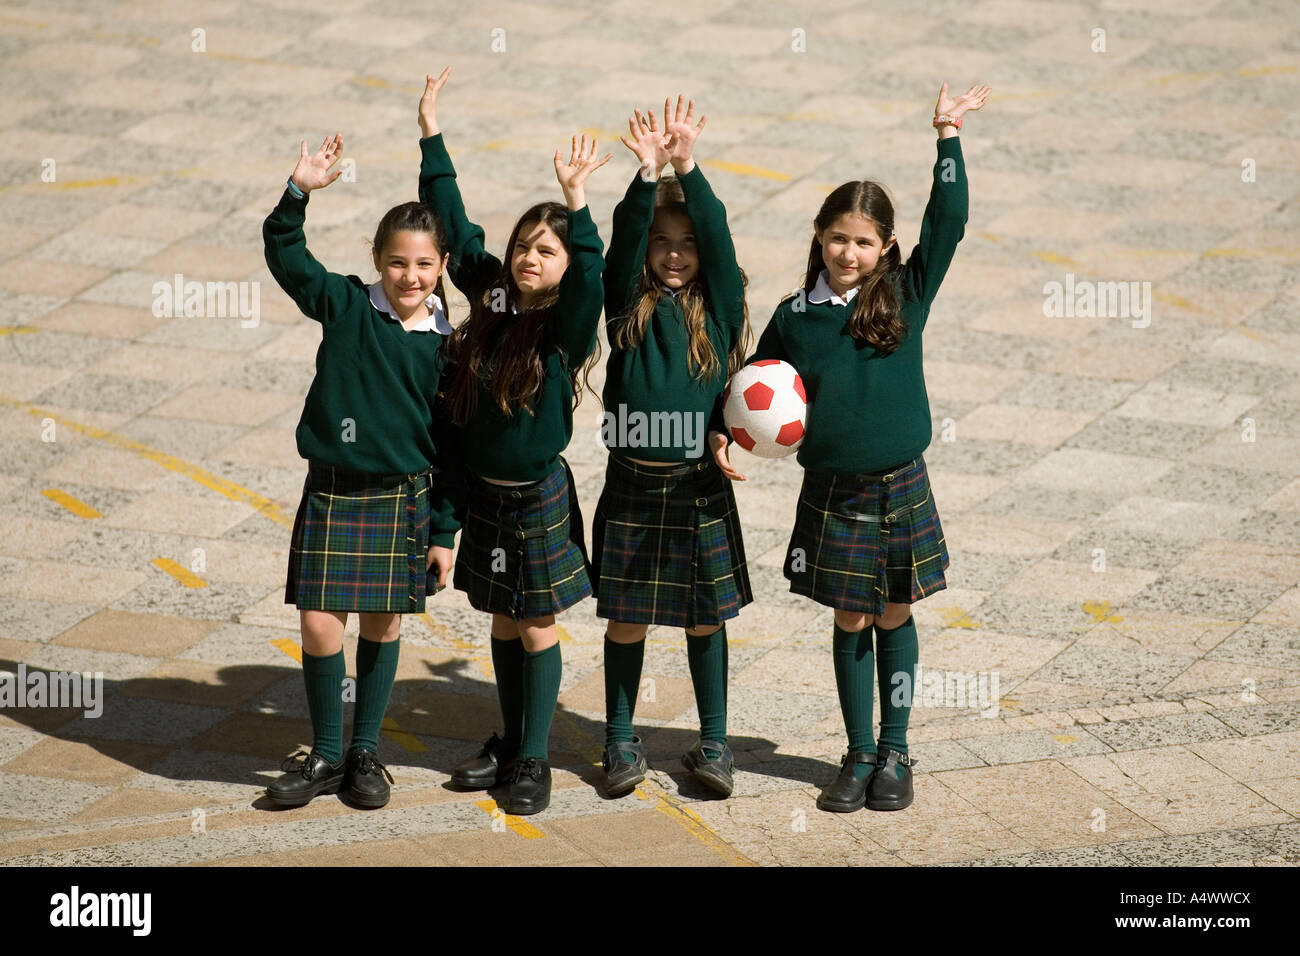 Young students waving while holding soccer ball in courtyard Stock Photo